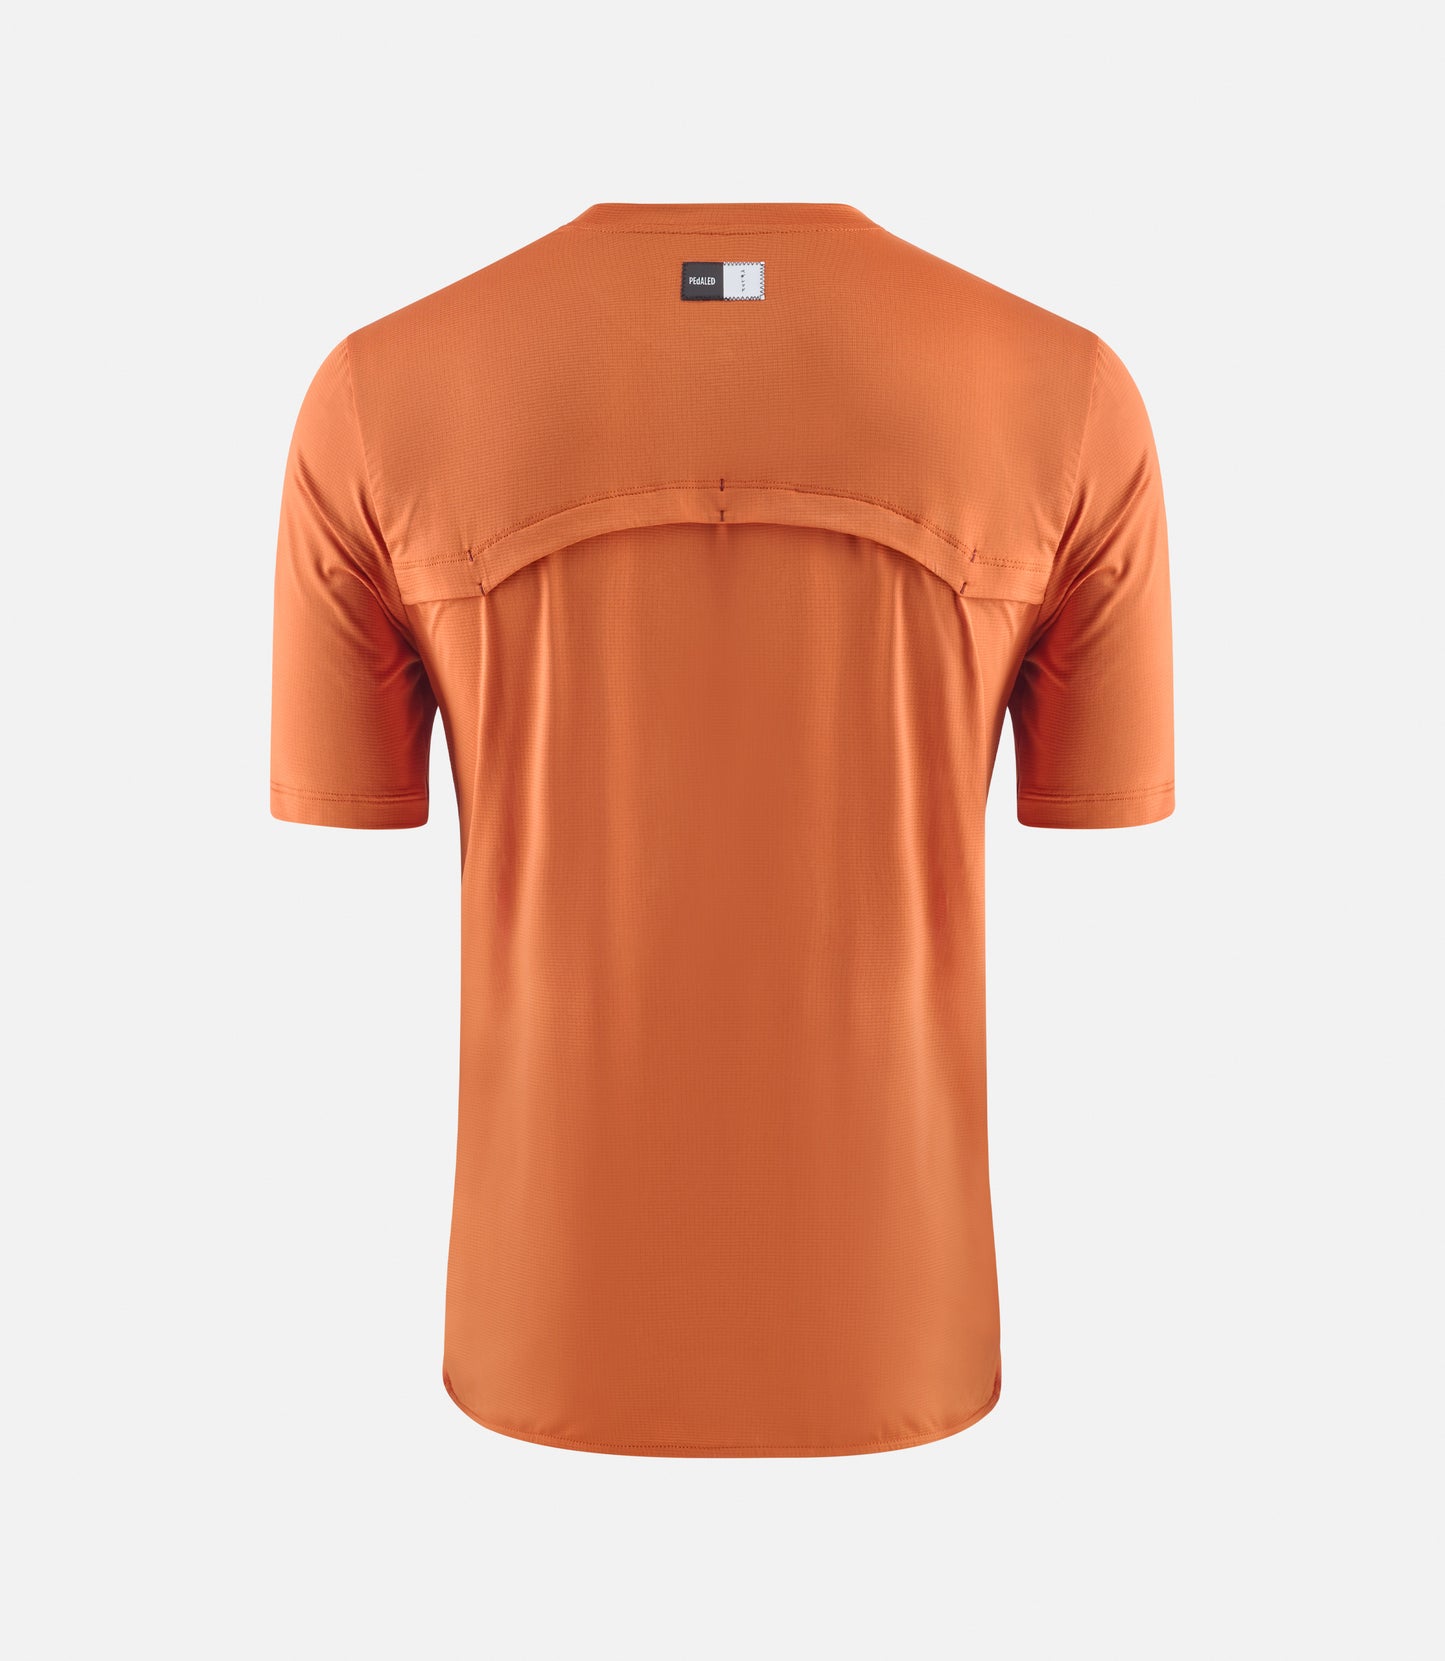 PEdALED Jary Gravel Polartec Tee Bombay Brown